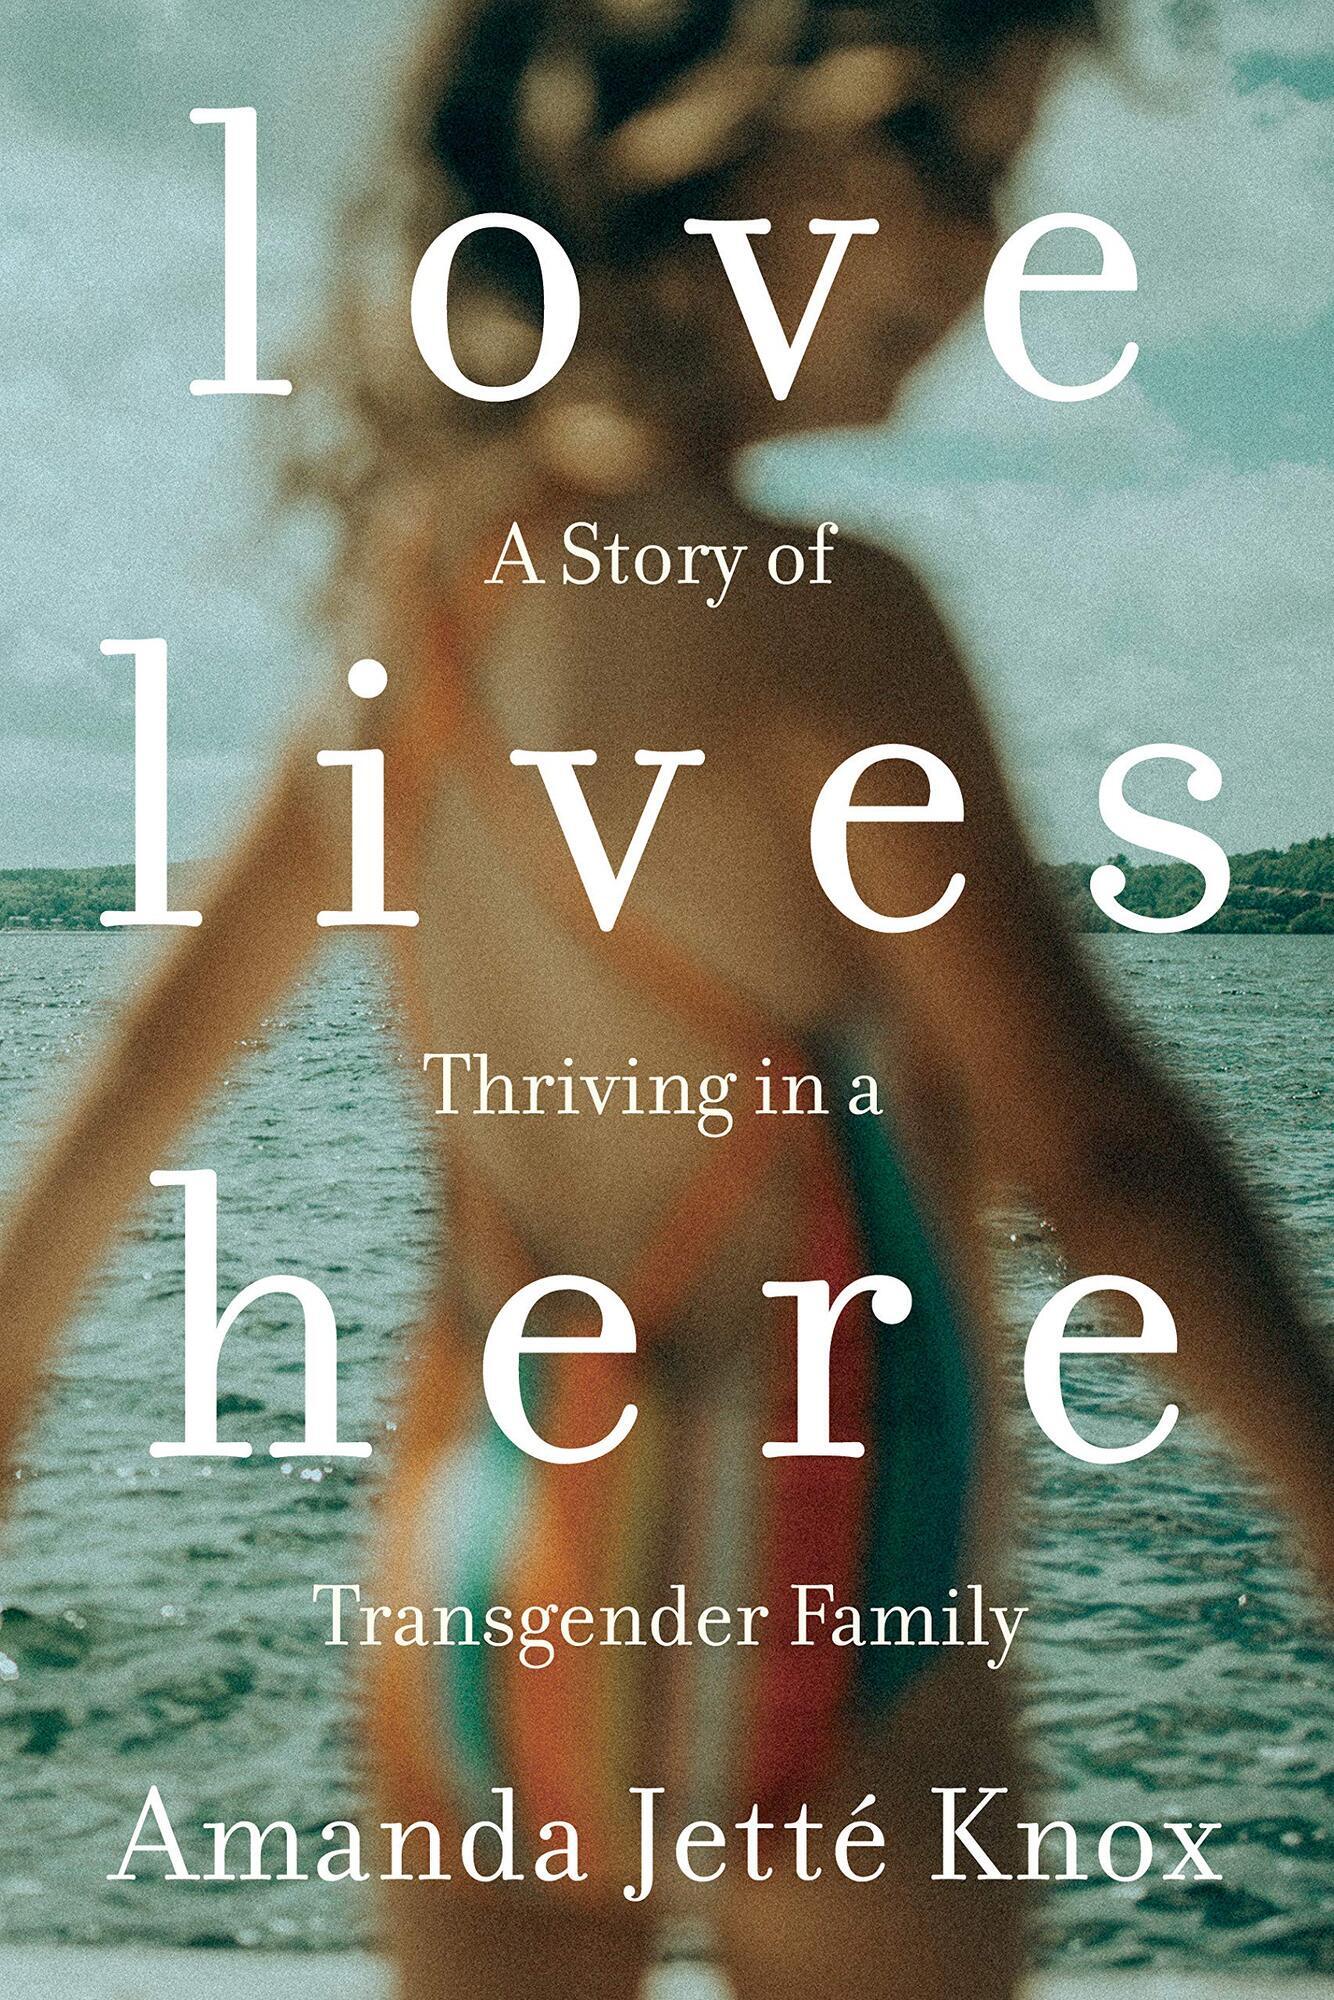 Love Lives Here A Story of Thriving in a Transgender Family